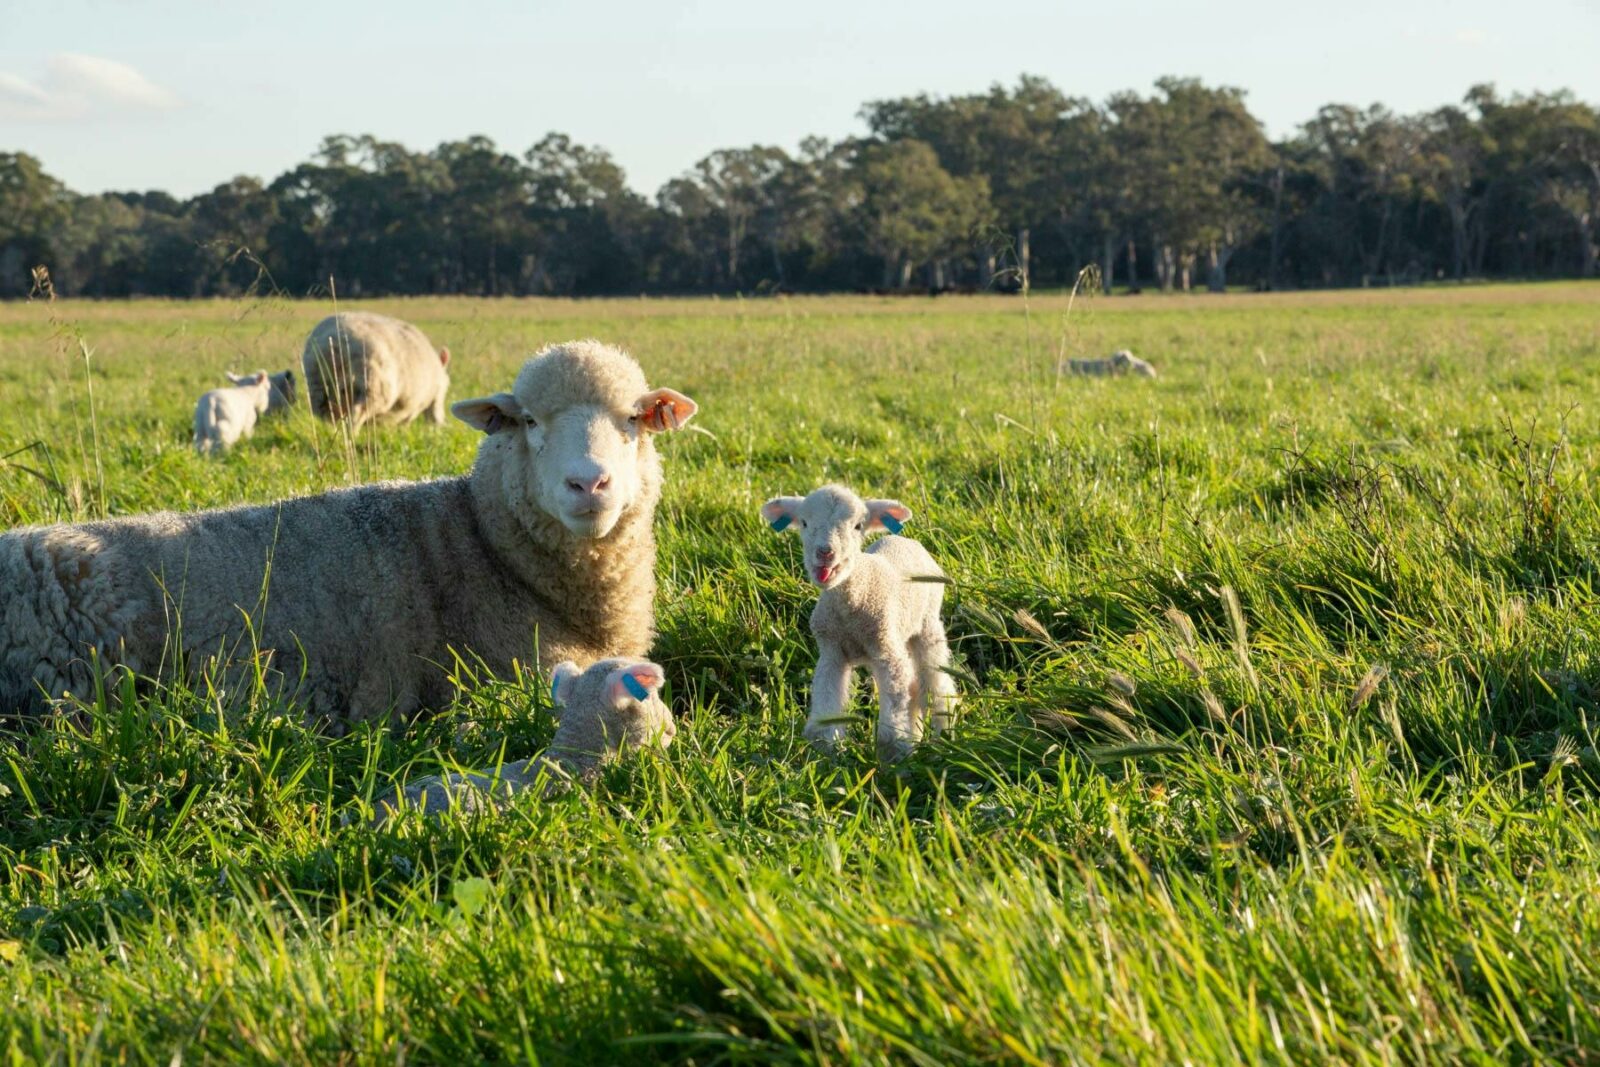 Sheep laying in green grass with baby lambs